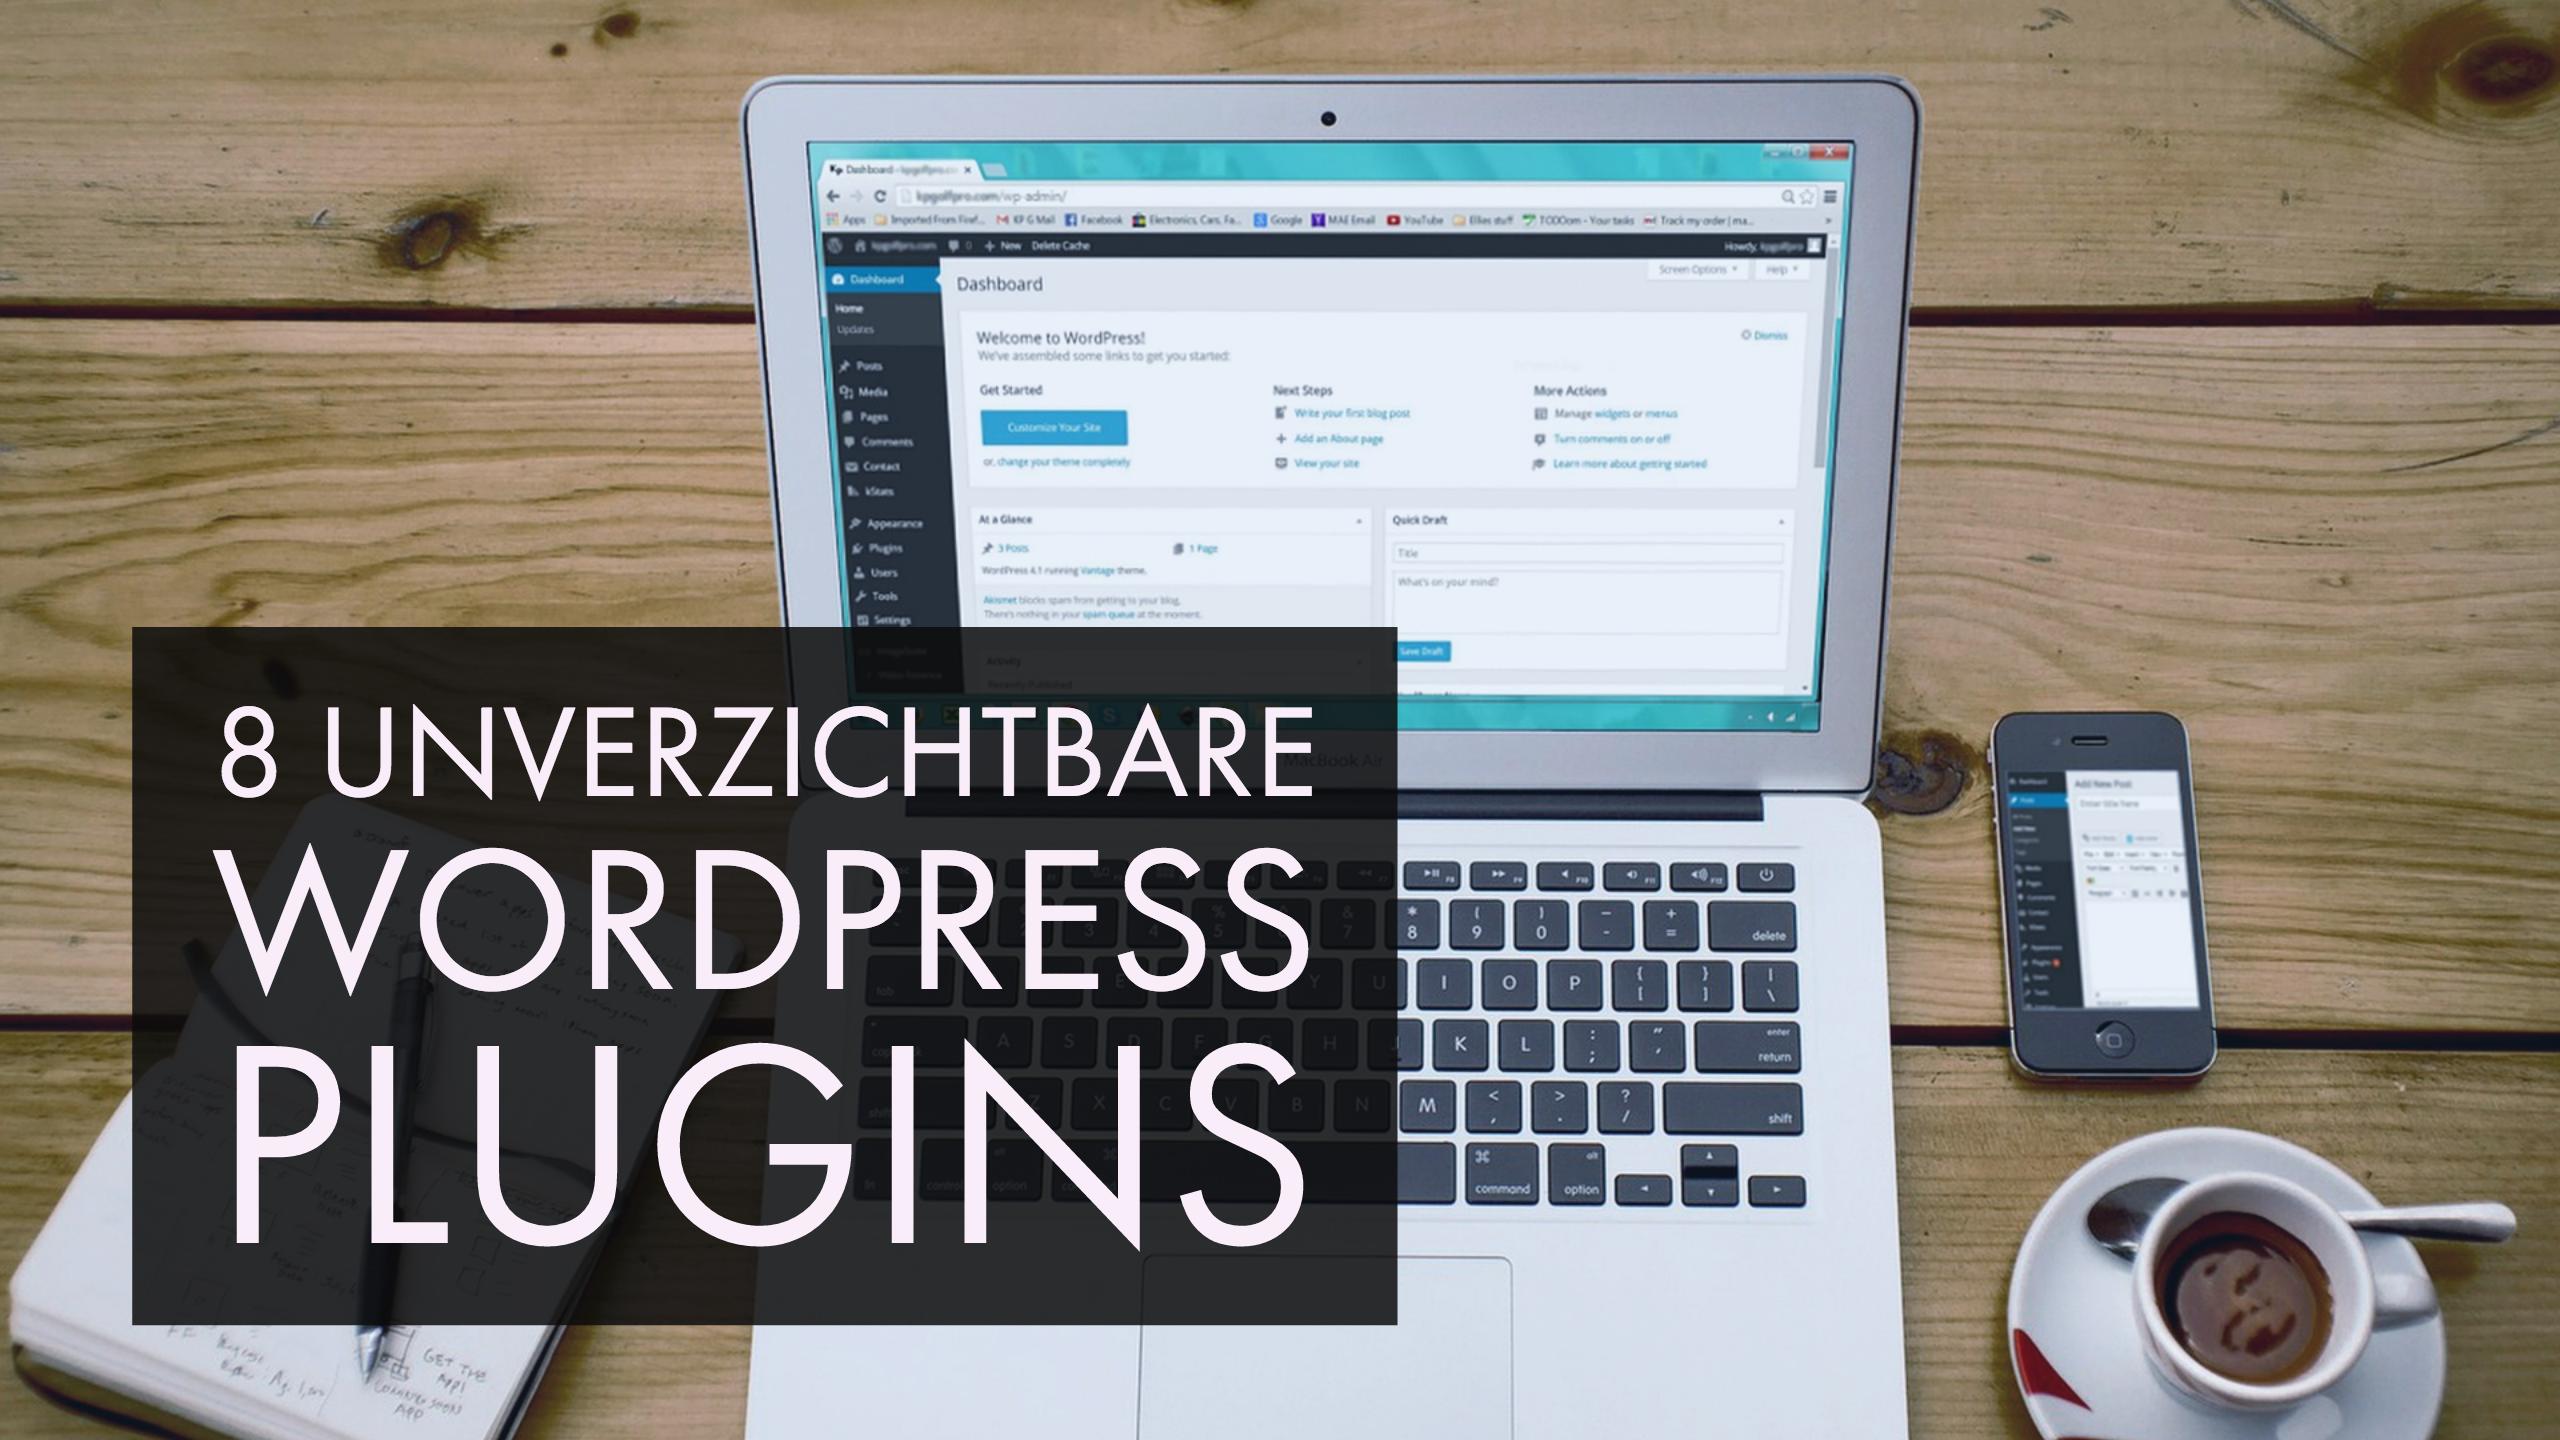 You are currently viewing 8 unverzichtbare WordPress Plugins (2016)